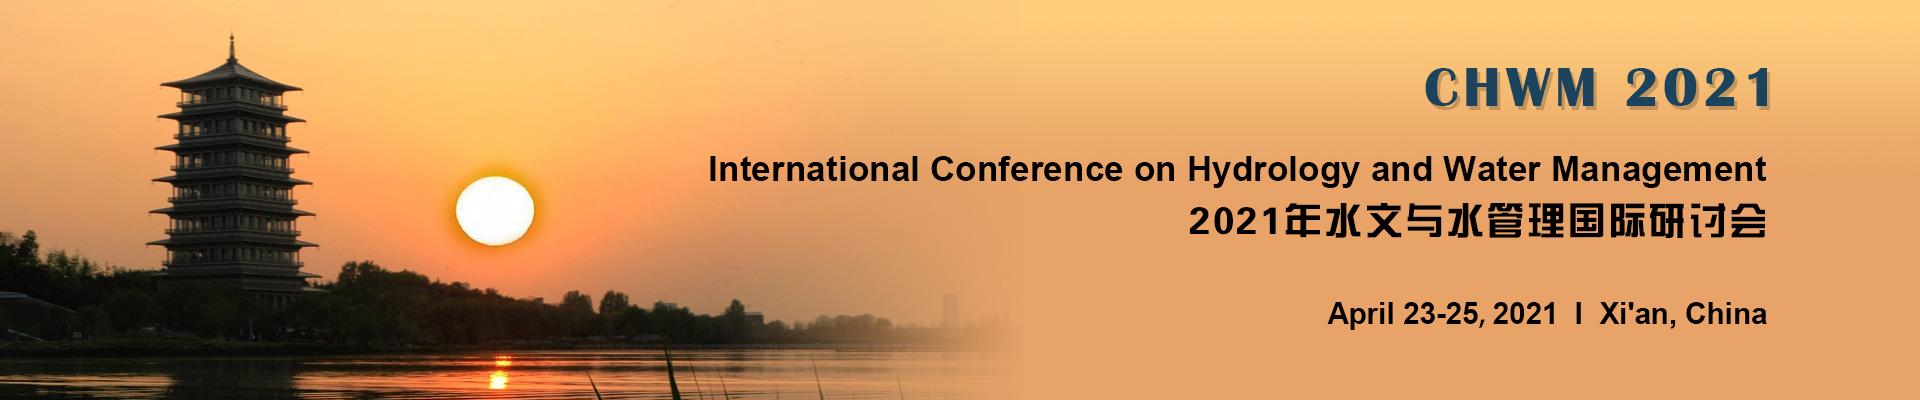 International Conference on Hydrology and Water Management (CHWM 2021), Xi'an, Shaanxi, China